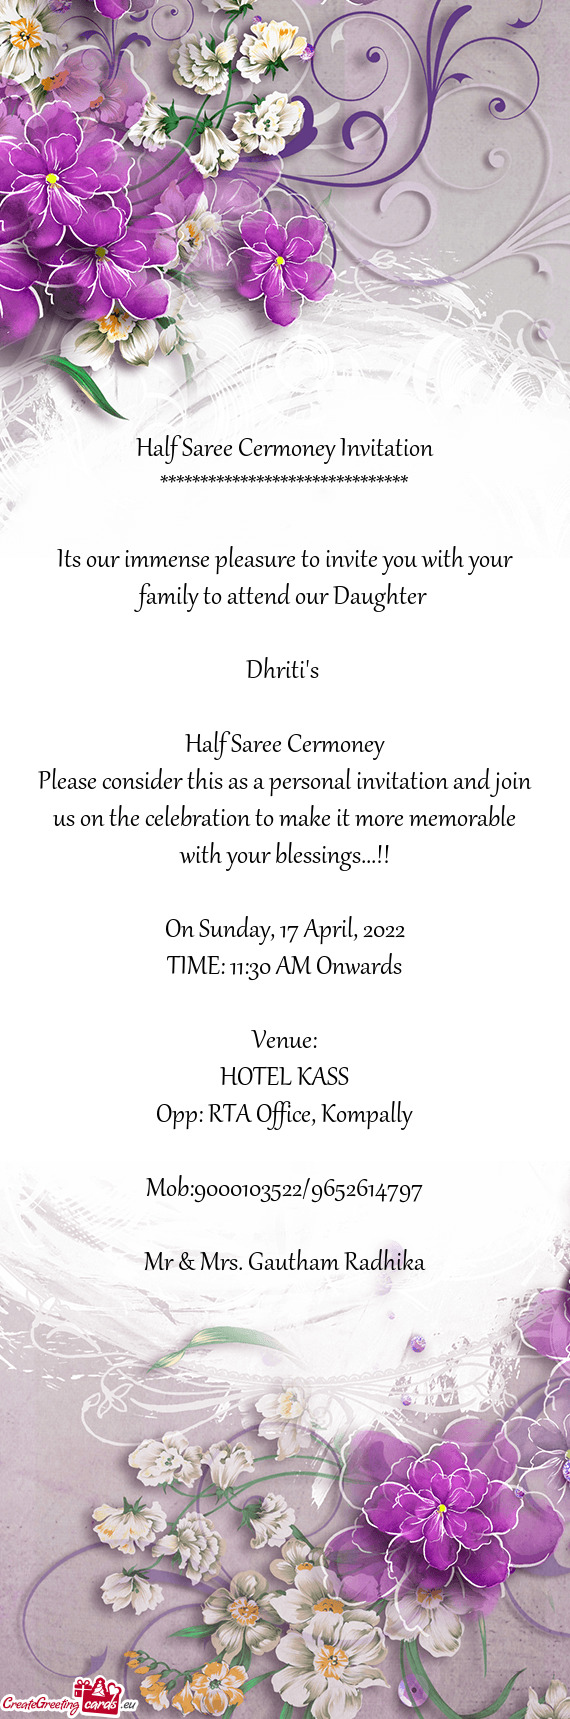 Its our immense pleasure to invite you with your family to attend our Daughter